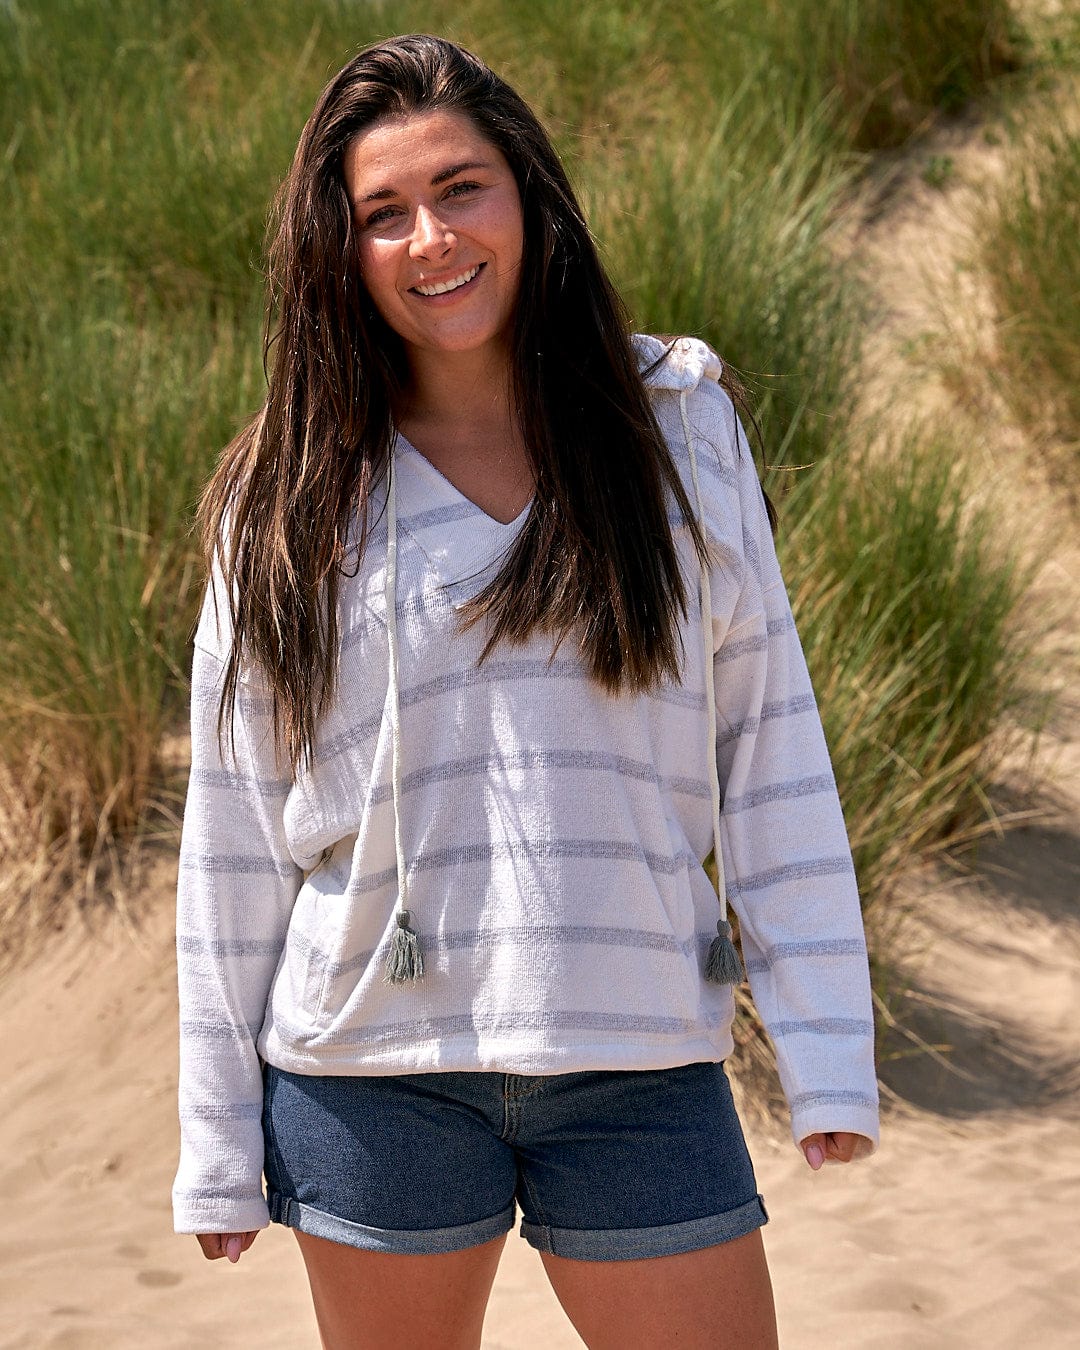 A young woman in shorts and a Saltrock Kennedy - Womens Pop Hoodie - Cream standing in the sand.